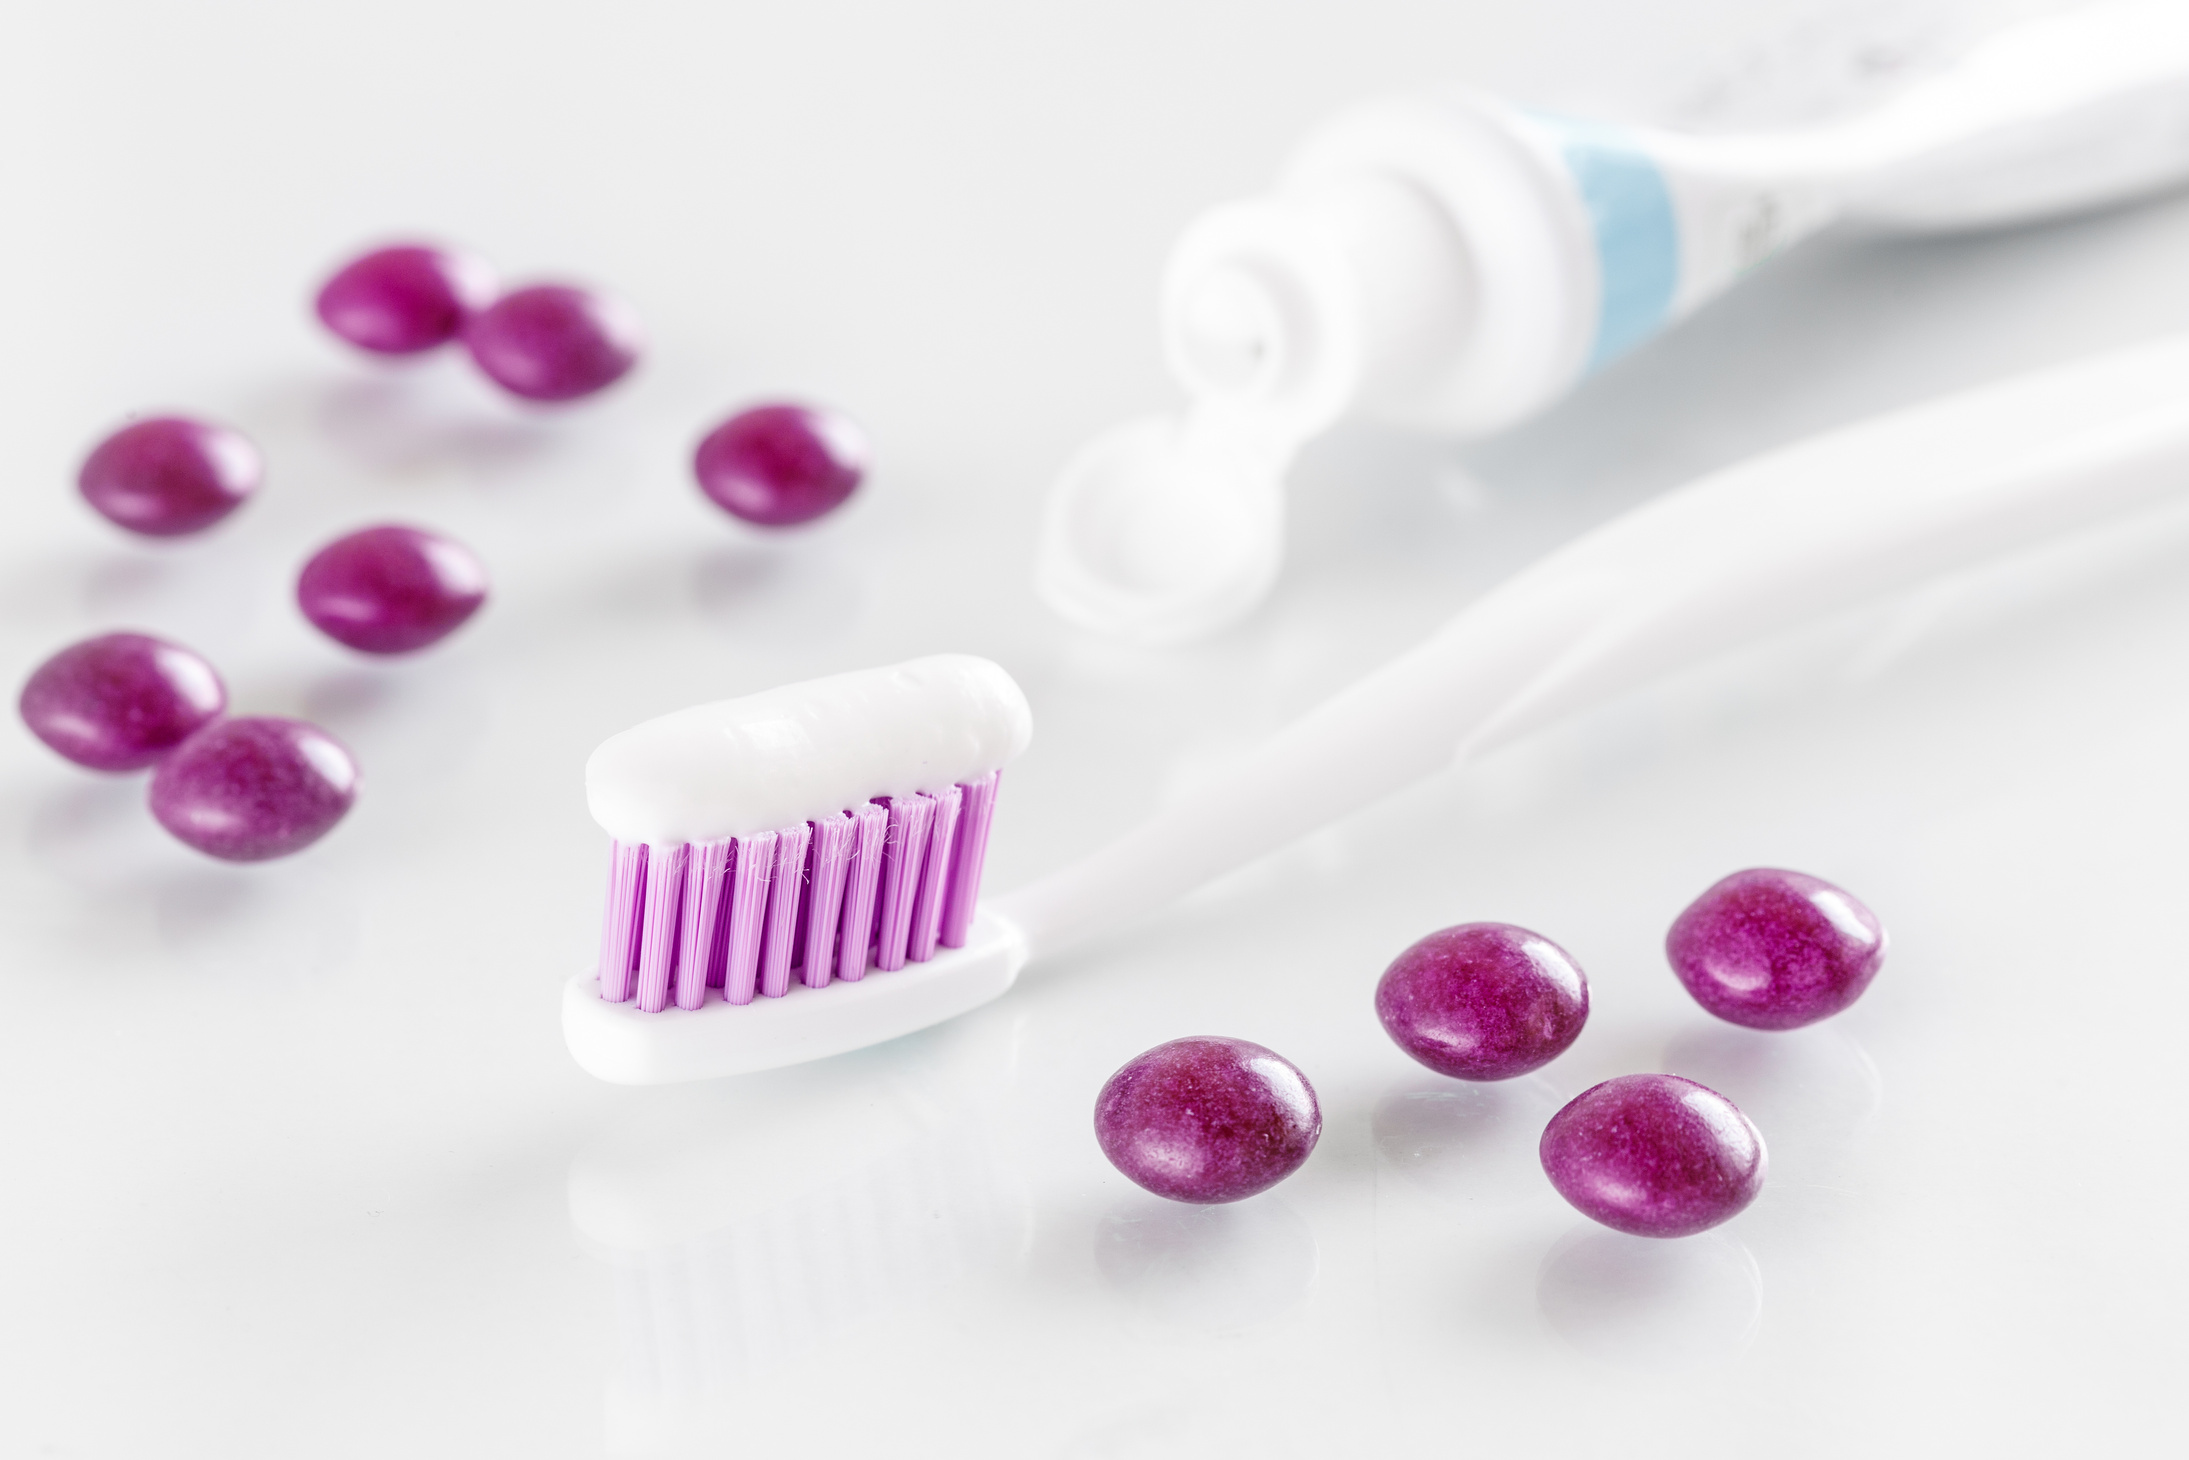 sqweezed purple toothbrush on white background with candies